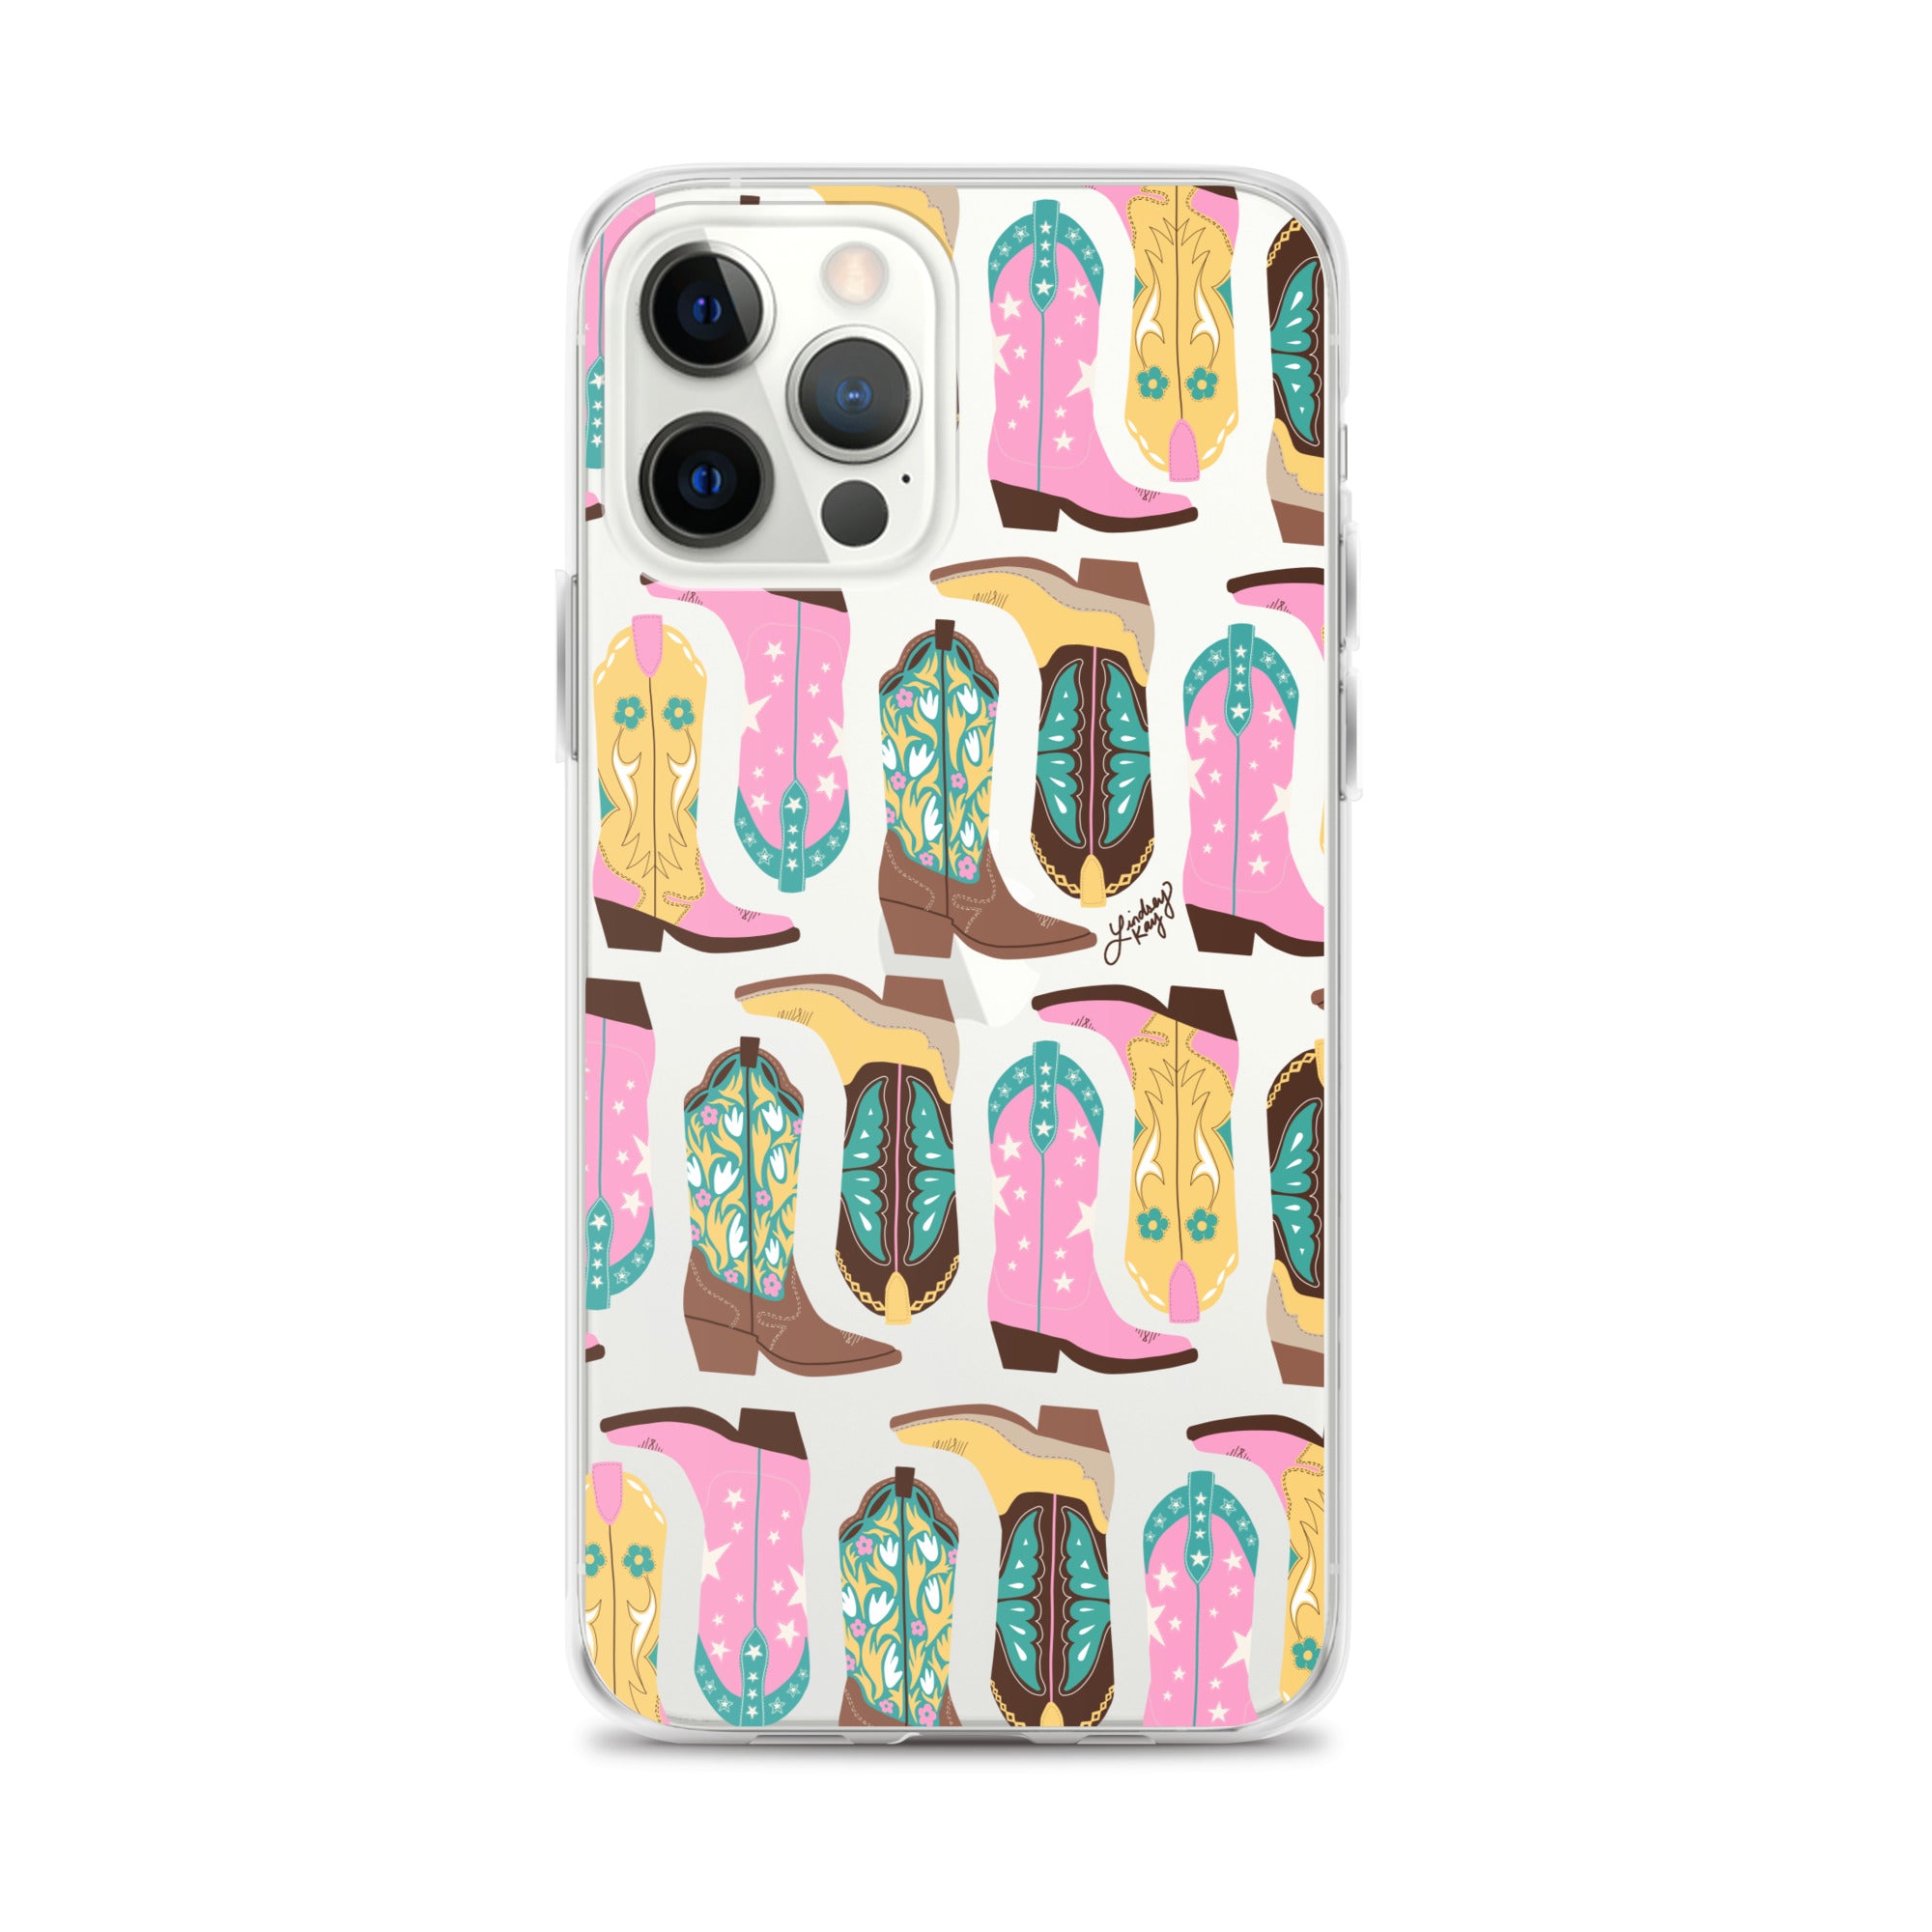 cowboy cowgirl boots pattern illustration turquoise pink yellow brown iphone case protector phone cover clear mobile accessories Lindsey Kay Collective trendy cute western country texas